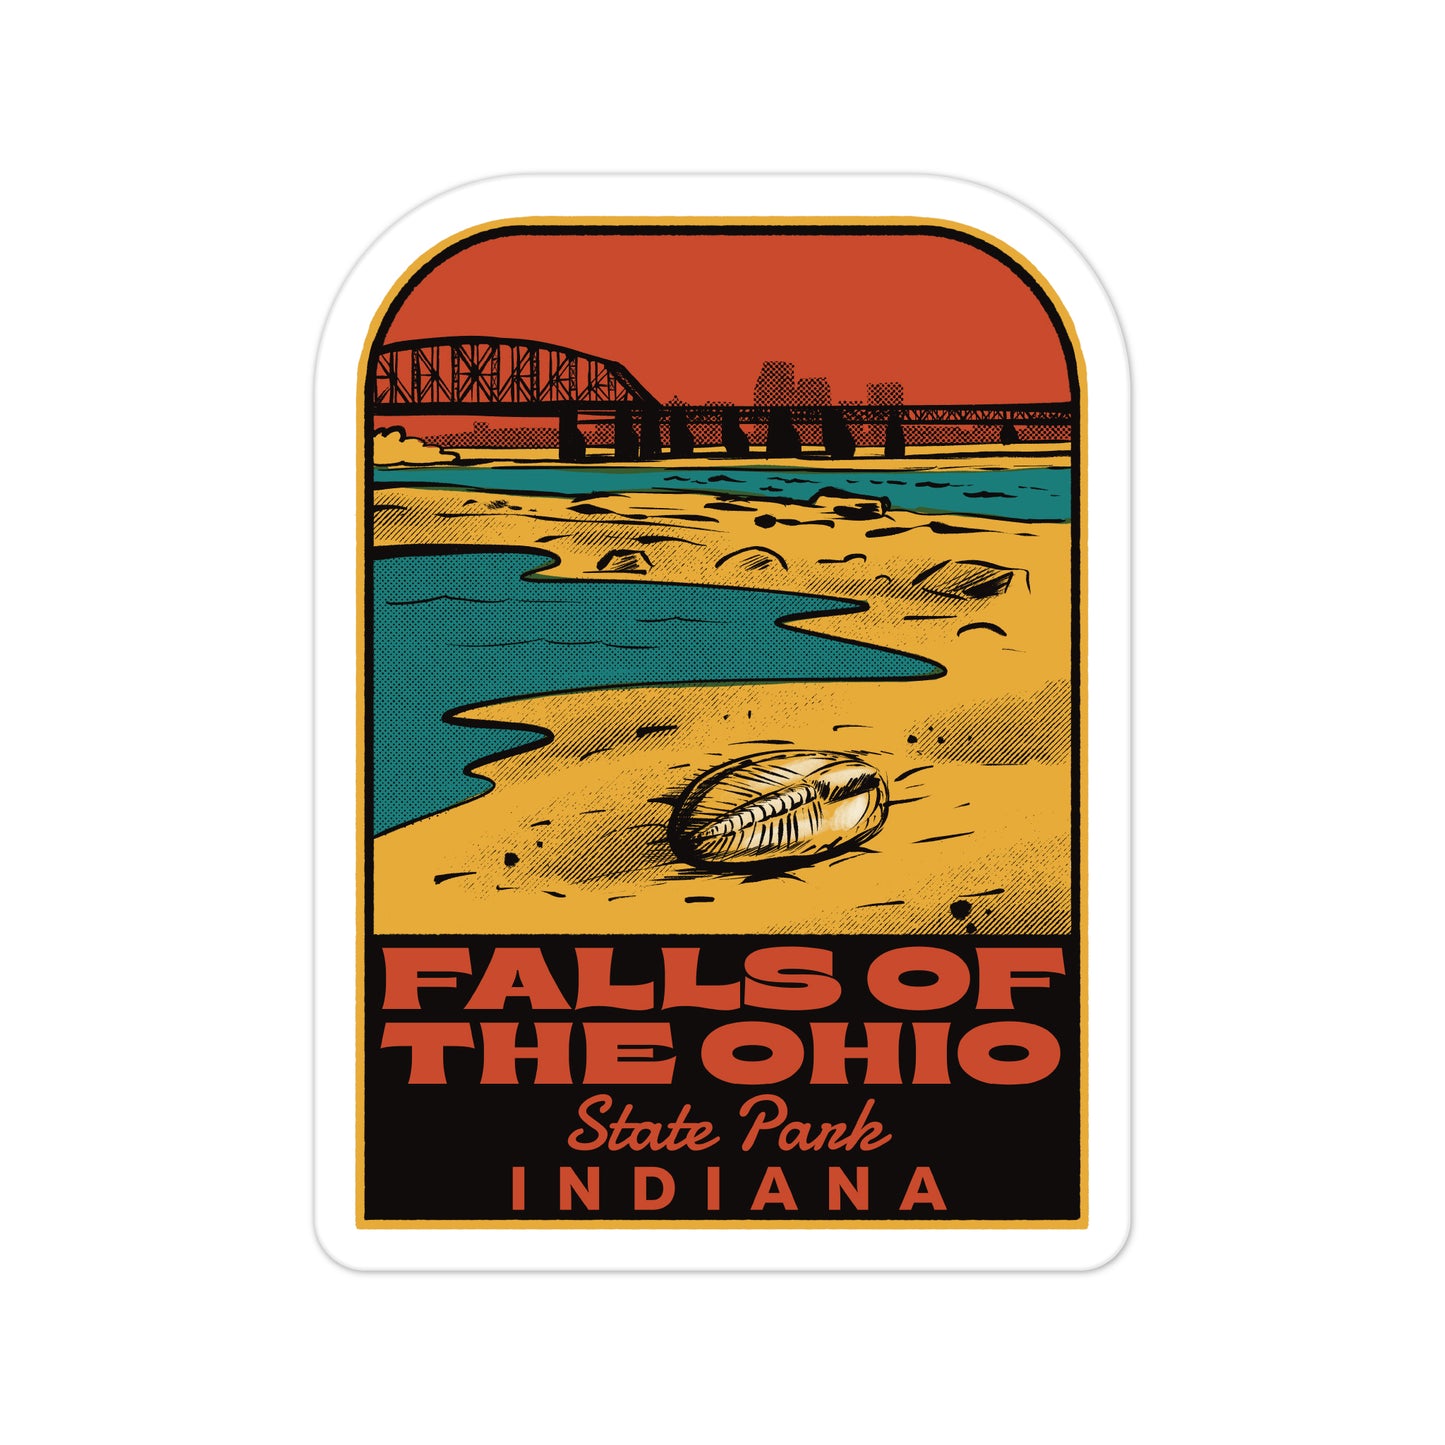 A sticker of Falls of the Ohio State Park